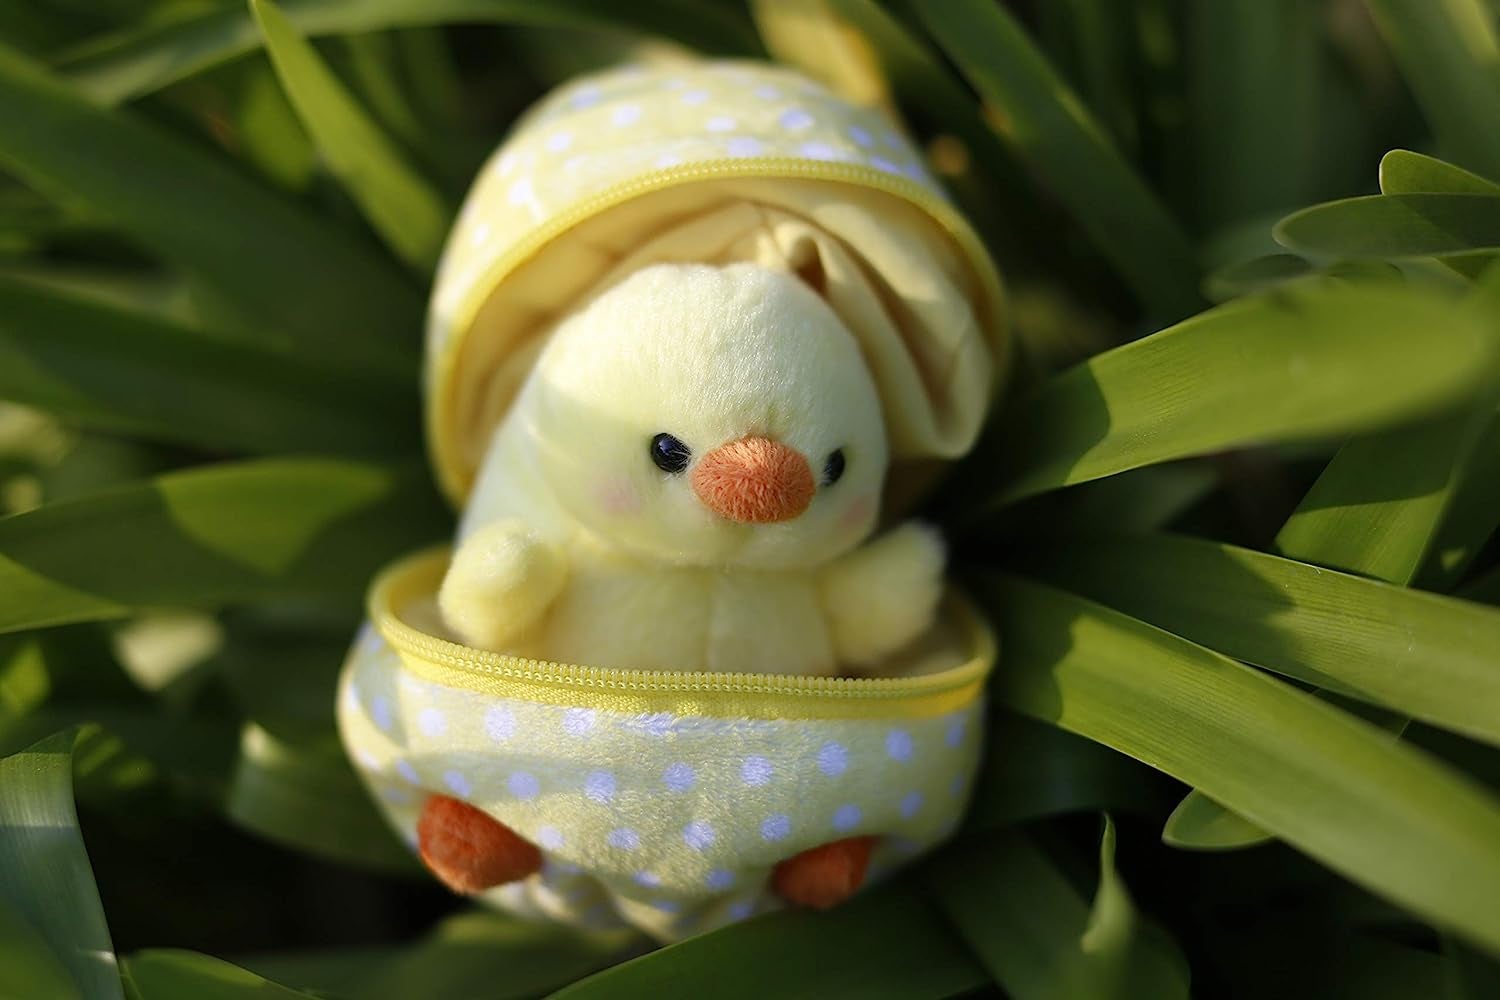 chic plush doll in grass